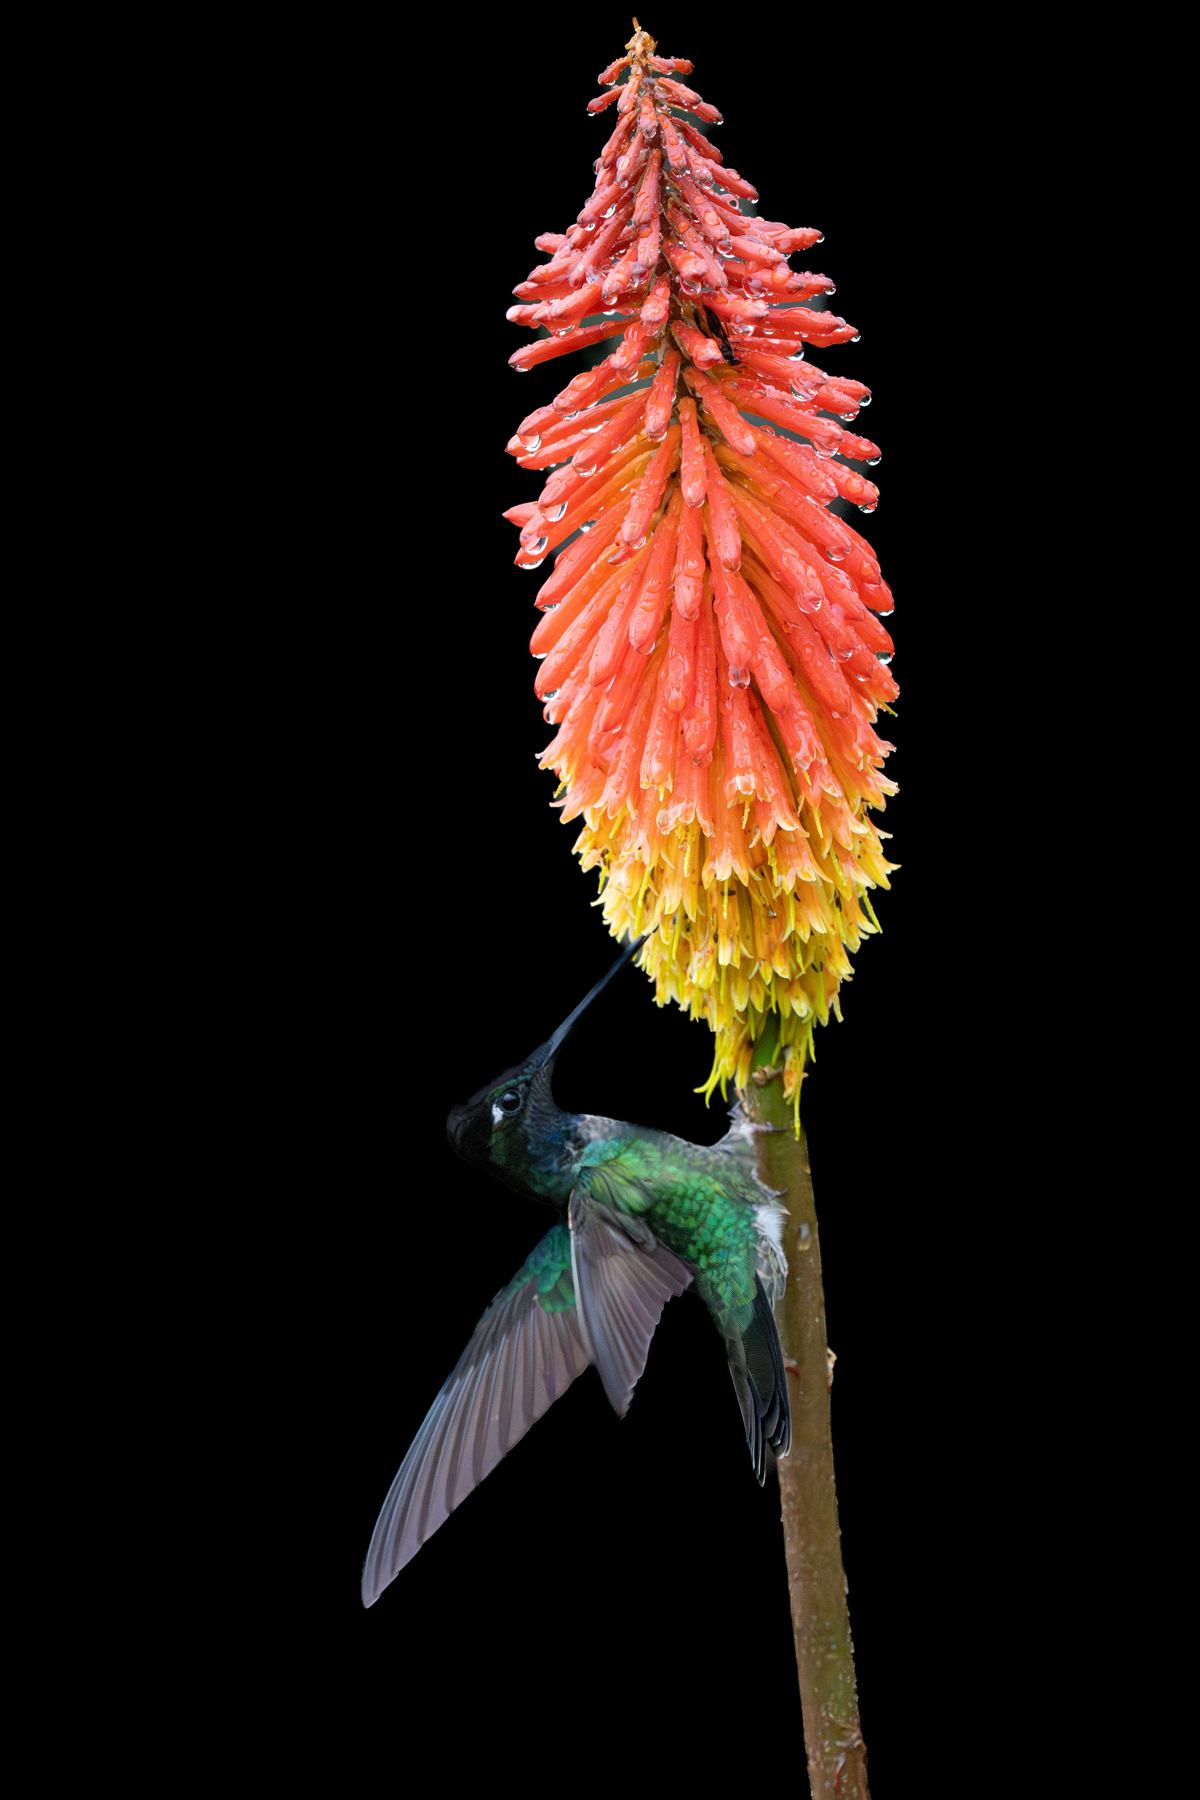 In Costa Rica's cloud forests brightly coloured flowers like this Red Hot Poker are a magnet for hummingbirds (image by Inger Vandyke)